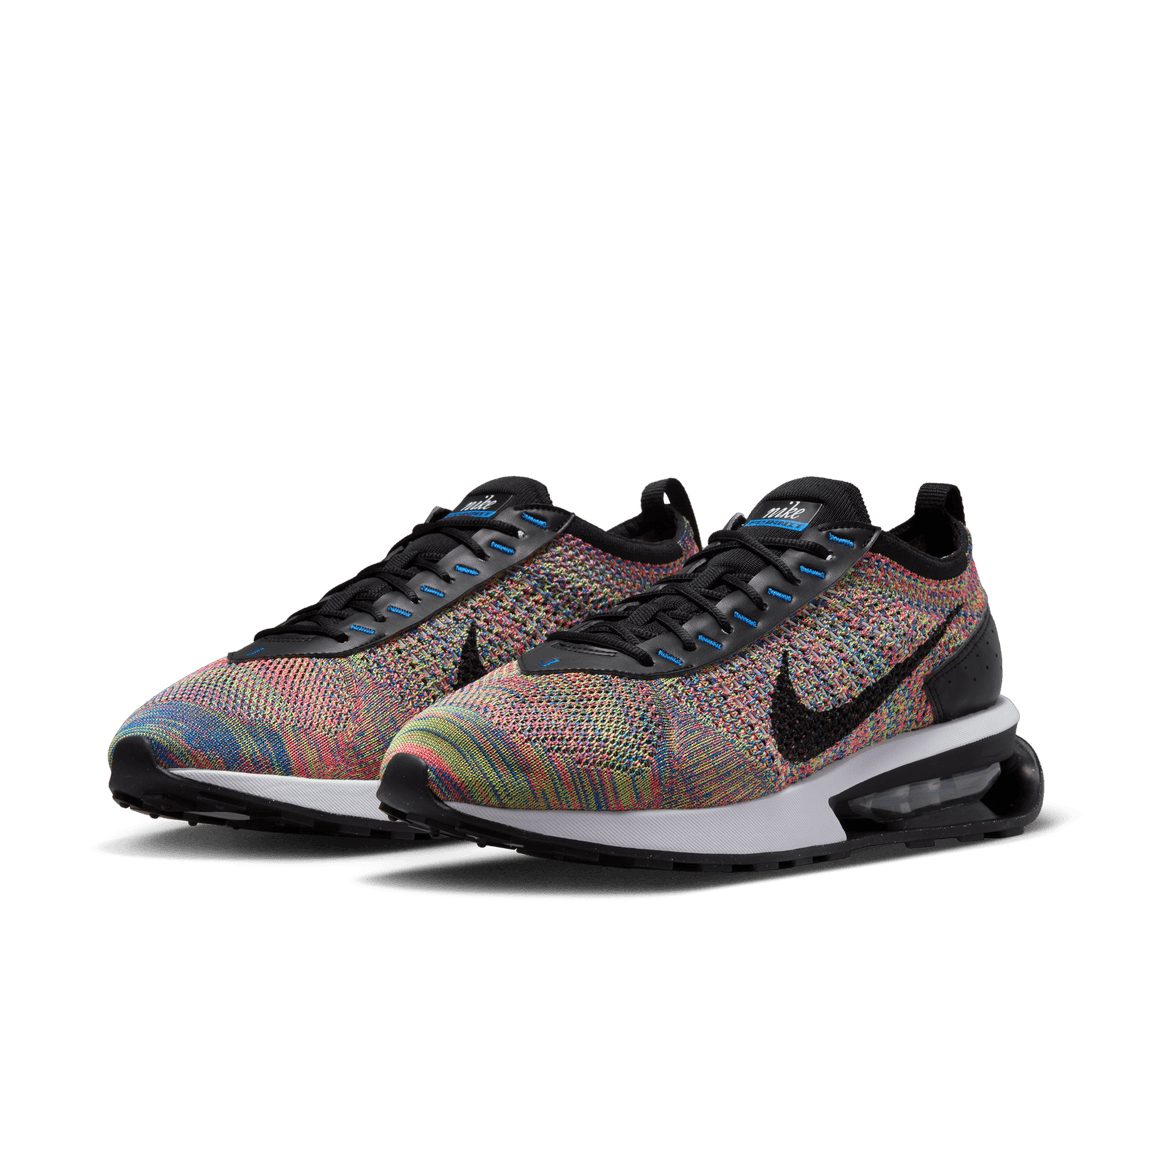 Nike Air Max Flyknit Racer (Multicolor/Black/Racer Blue-White) - Nike Air Max Flyknit Racer (Multicolor/Black/Racer Blue-White) - 